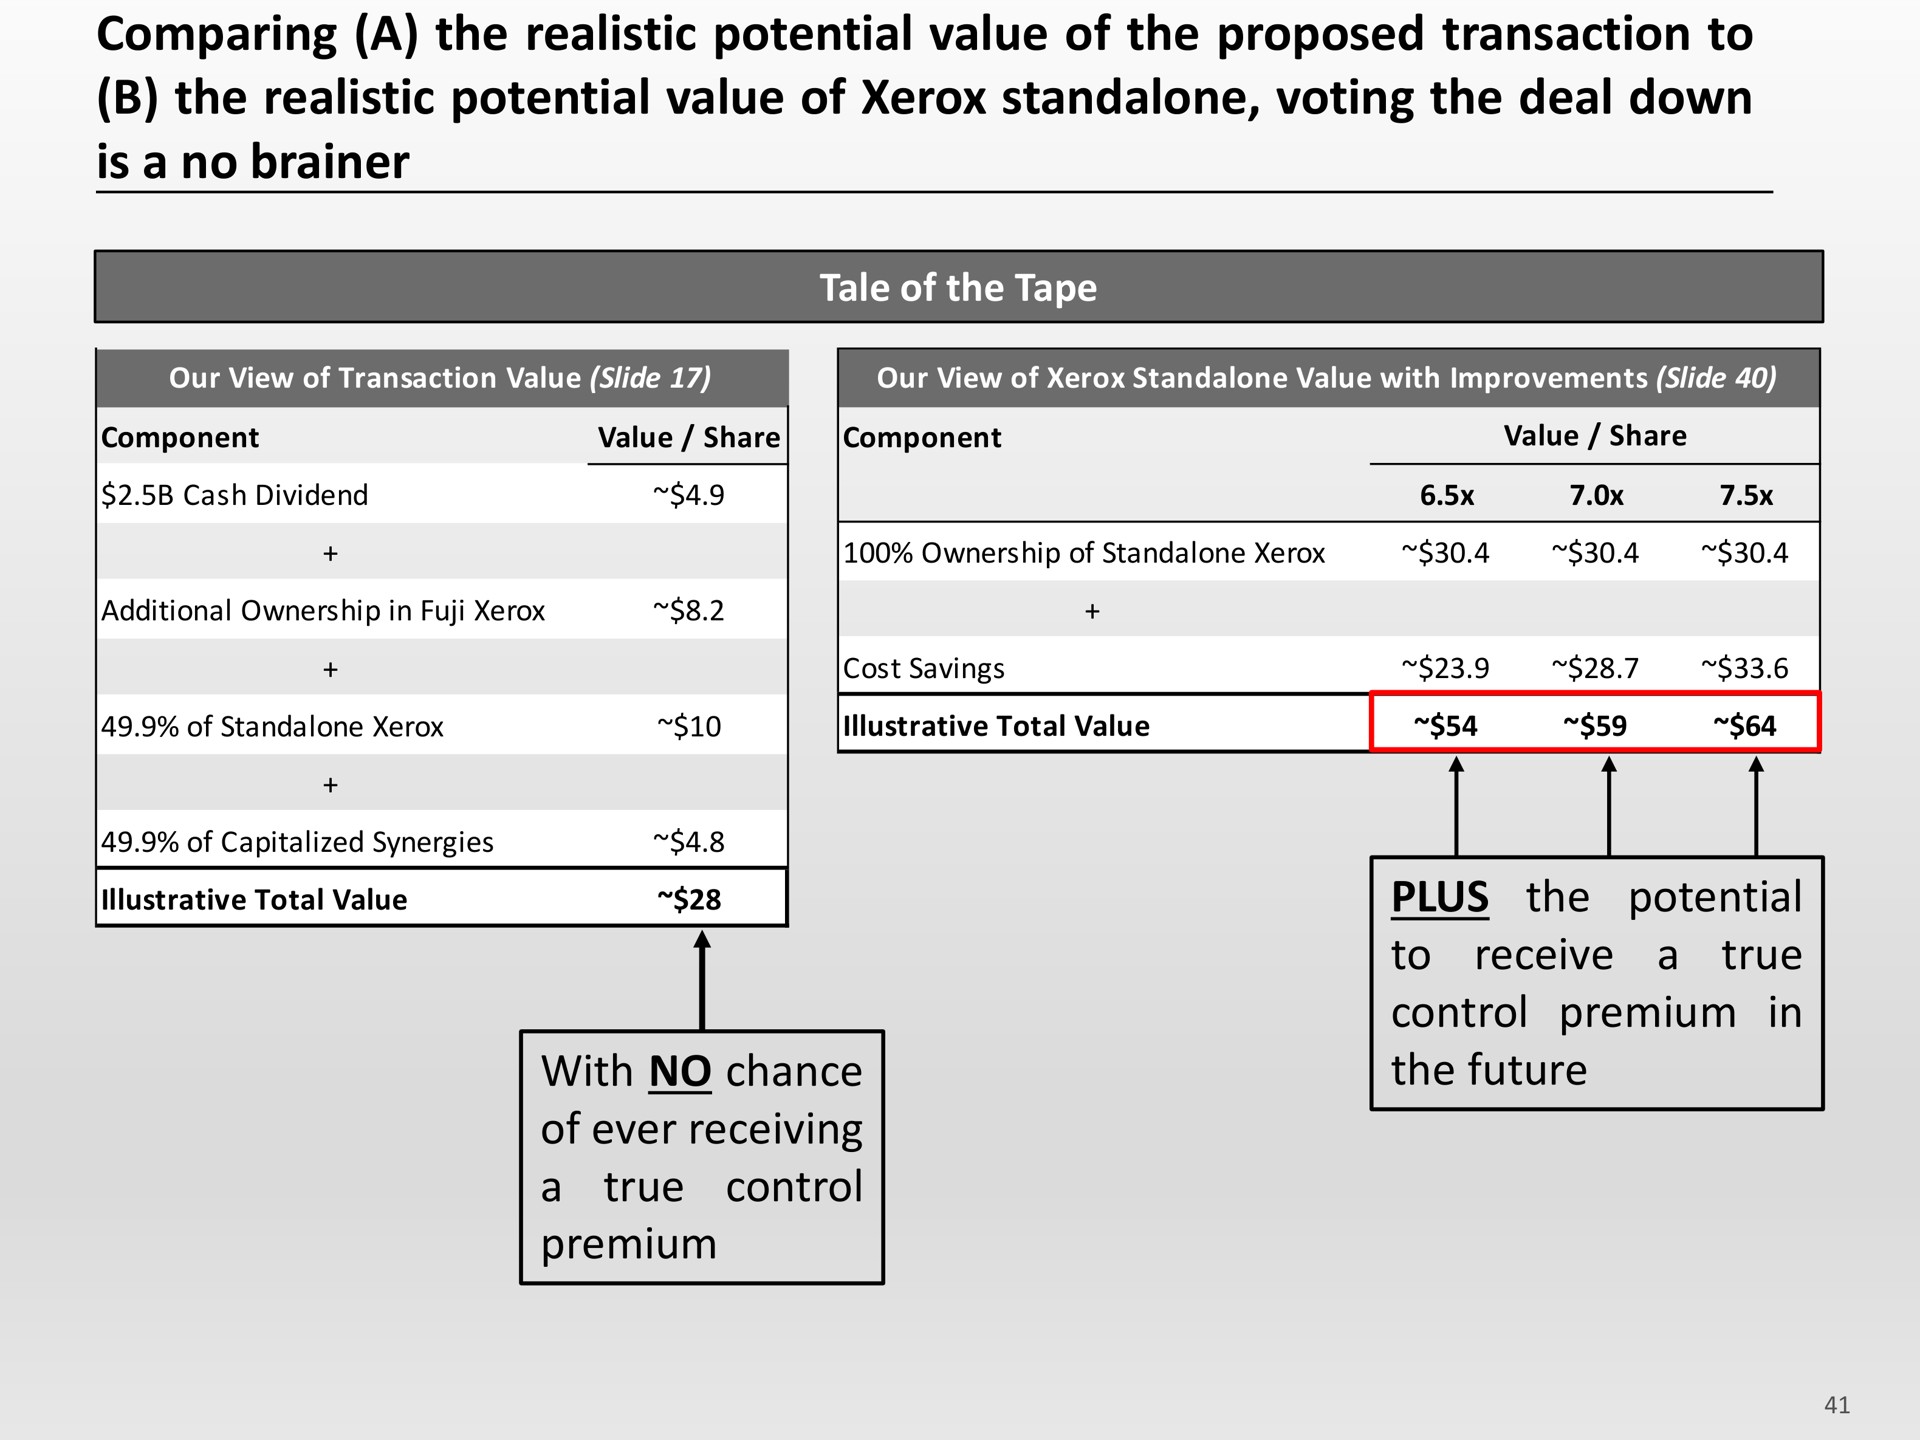 comparing a the realistic potential value of the proposed transaction to the realistic potential value of voting the deal down is a no brainer plus | Icahn Enterprises